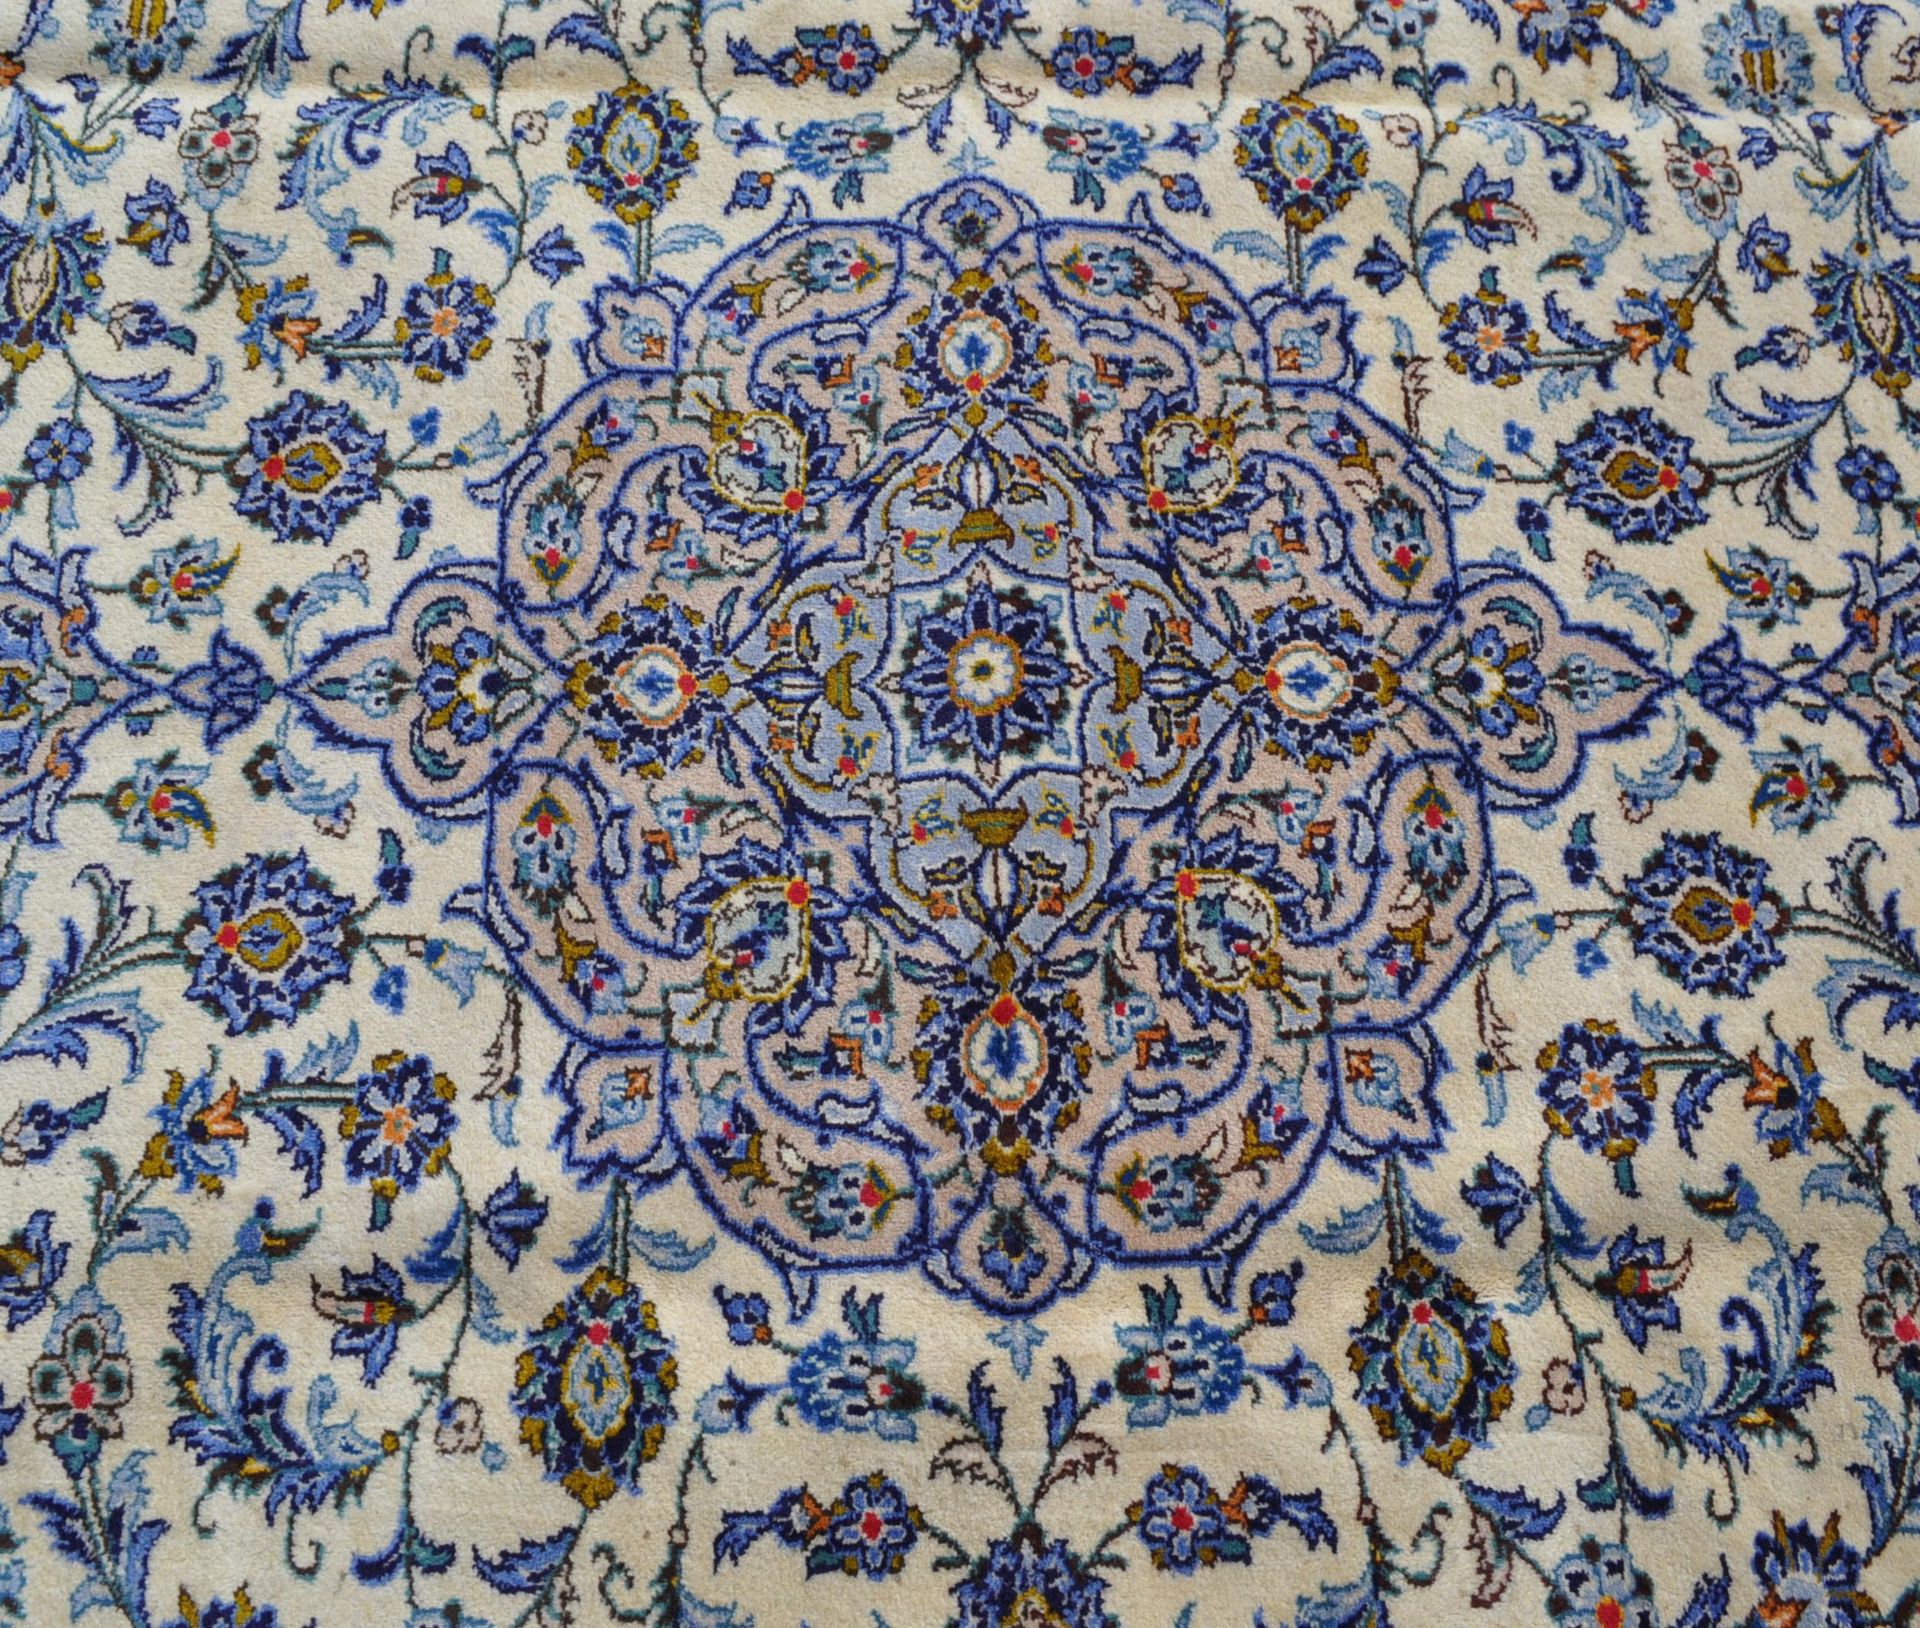 20TH CENTURY CENTRAL PERSIAN KASHAN RUG - Image 6 of 6